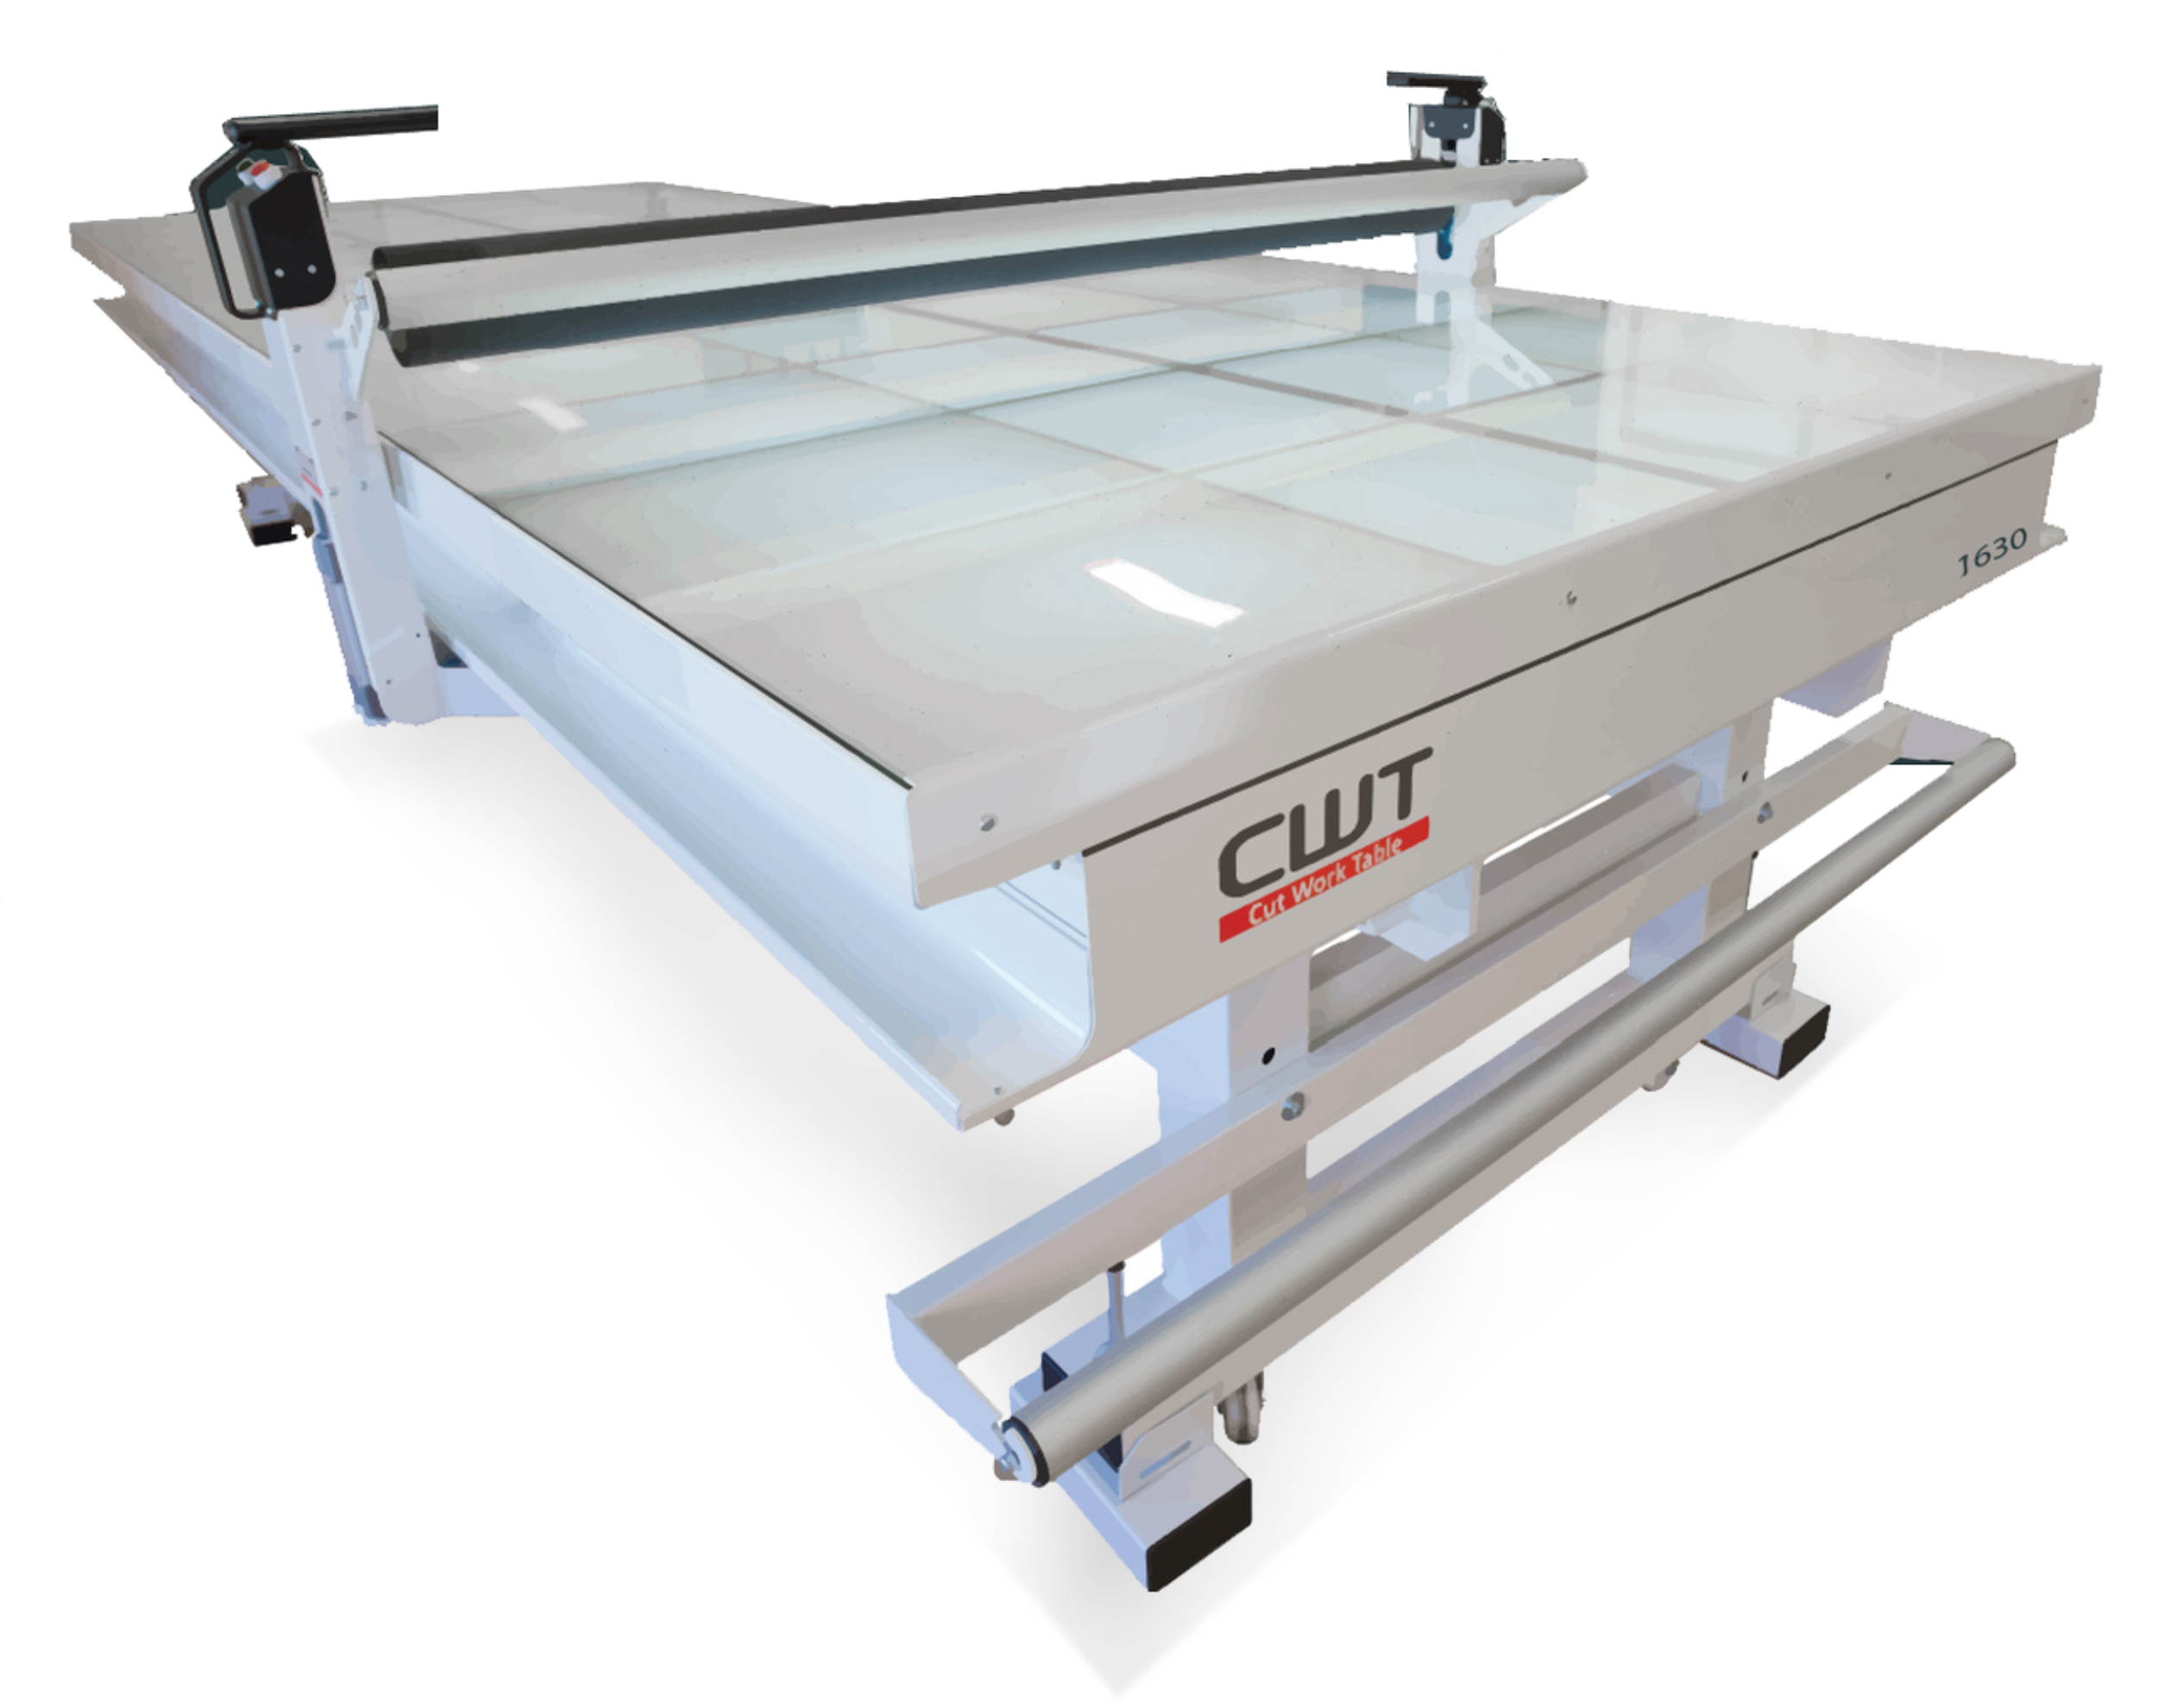 “CWT 1630 Regular Flatbed Work Table ... cut our production time by leaps and bounds.”